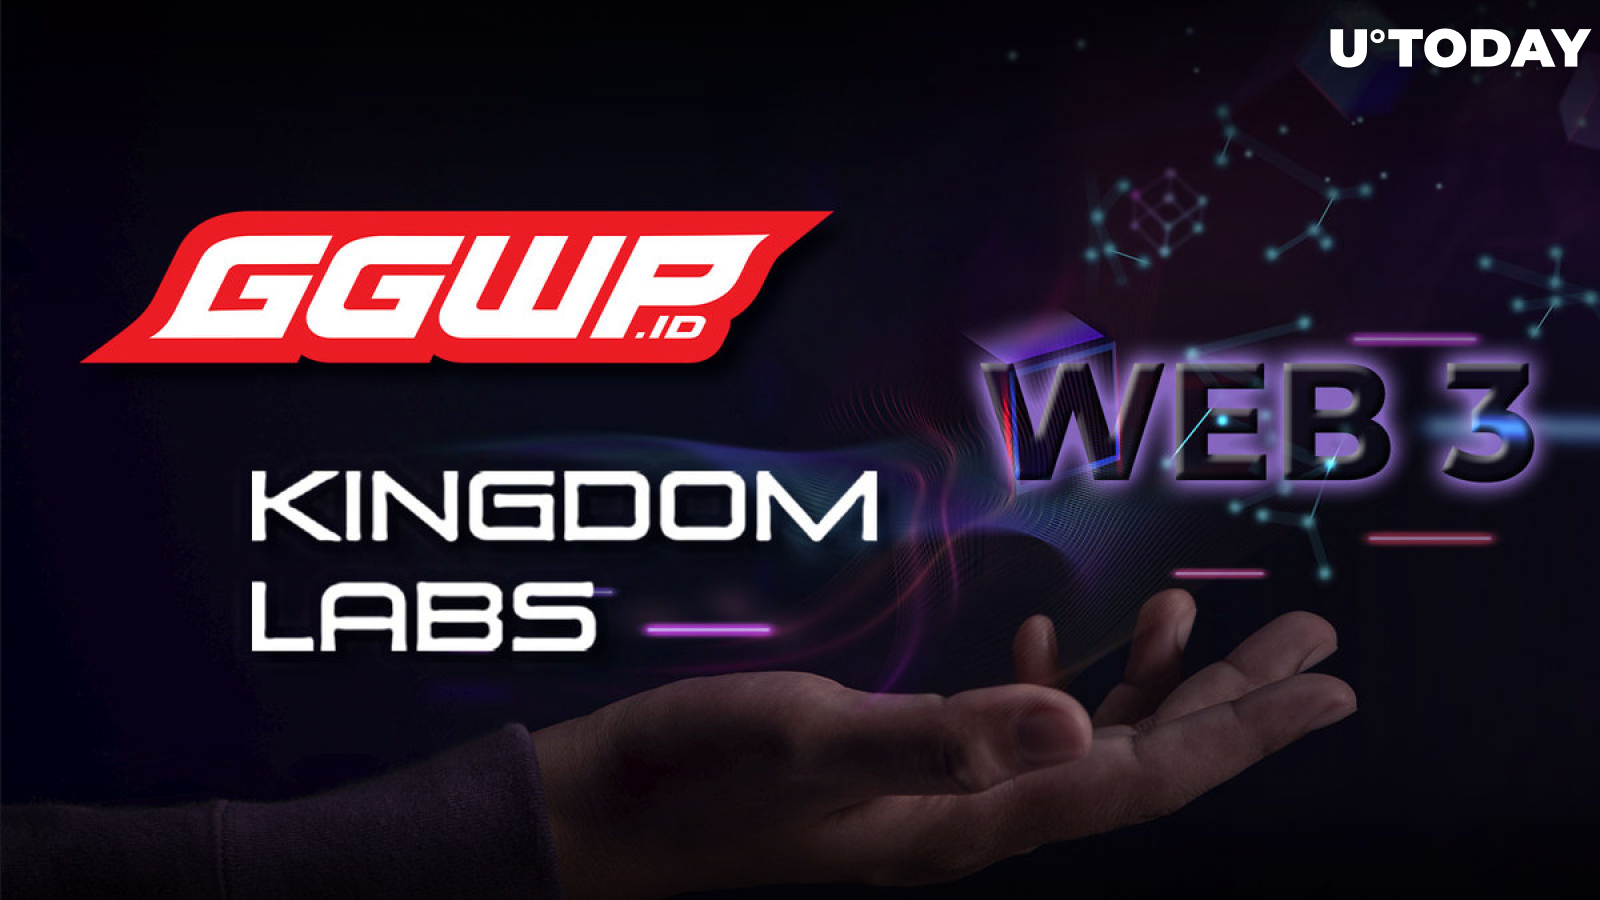 Kingdom Labs Announces Infrastructure Collaboration with GGWP.ID